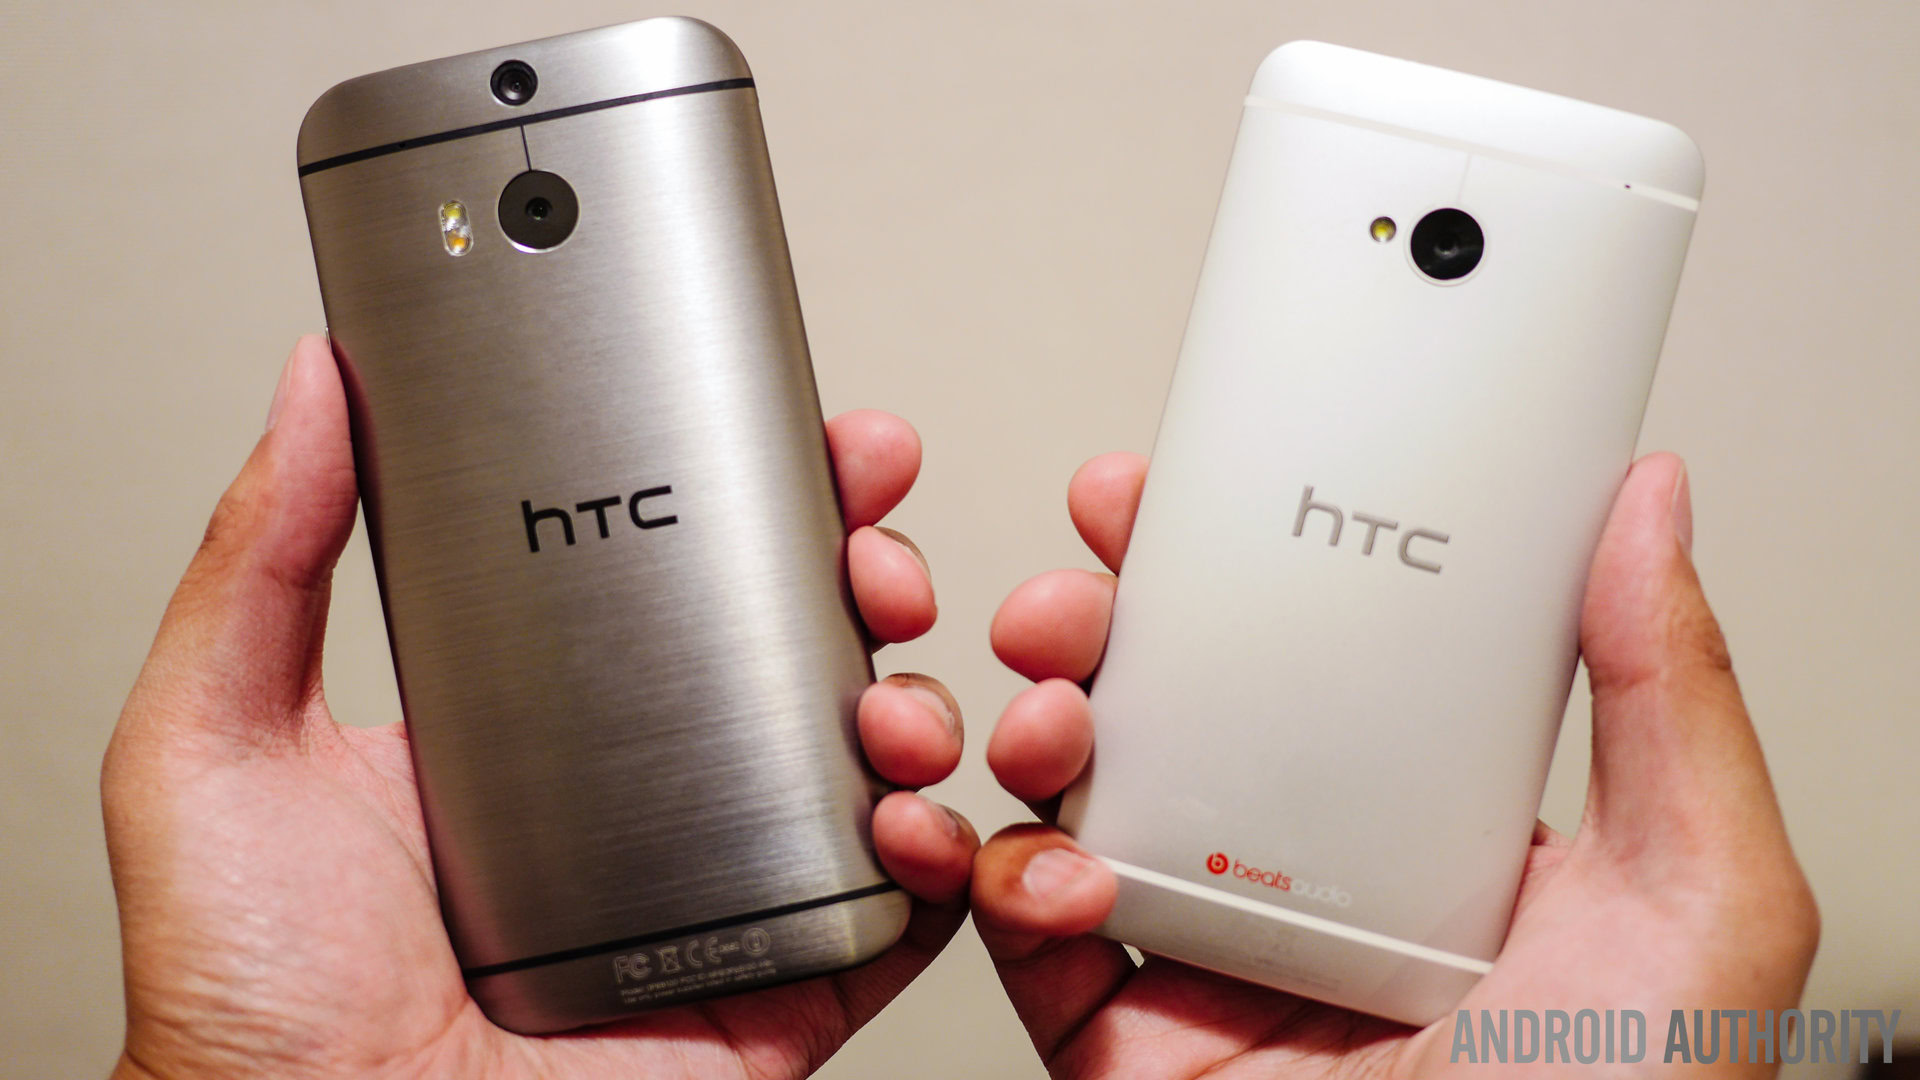 htc one m8 vs htc one m7 quick look aa handheld (5 of 6)